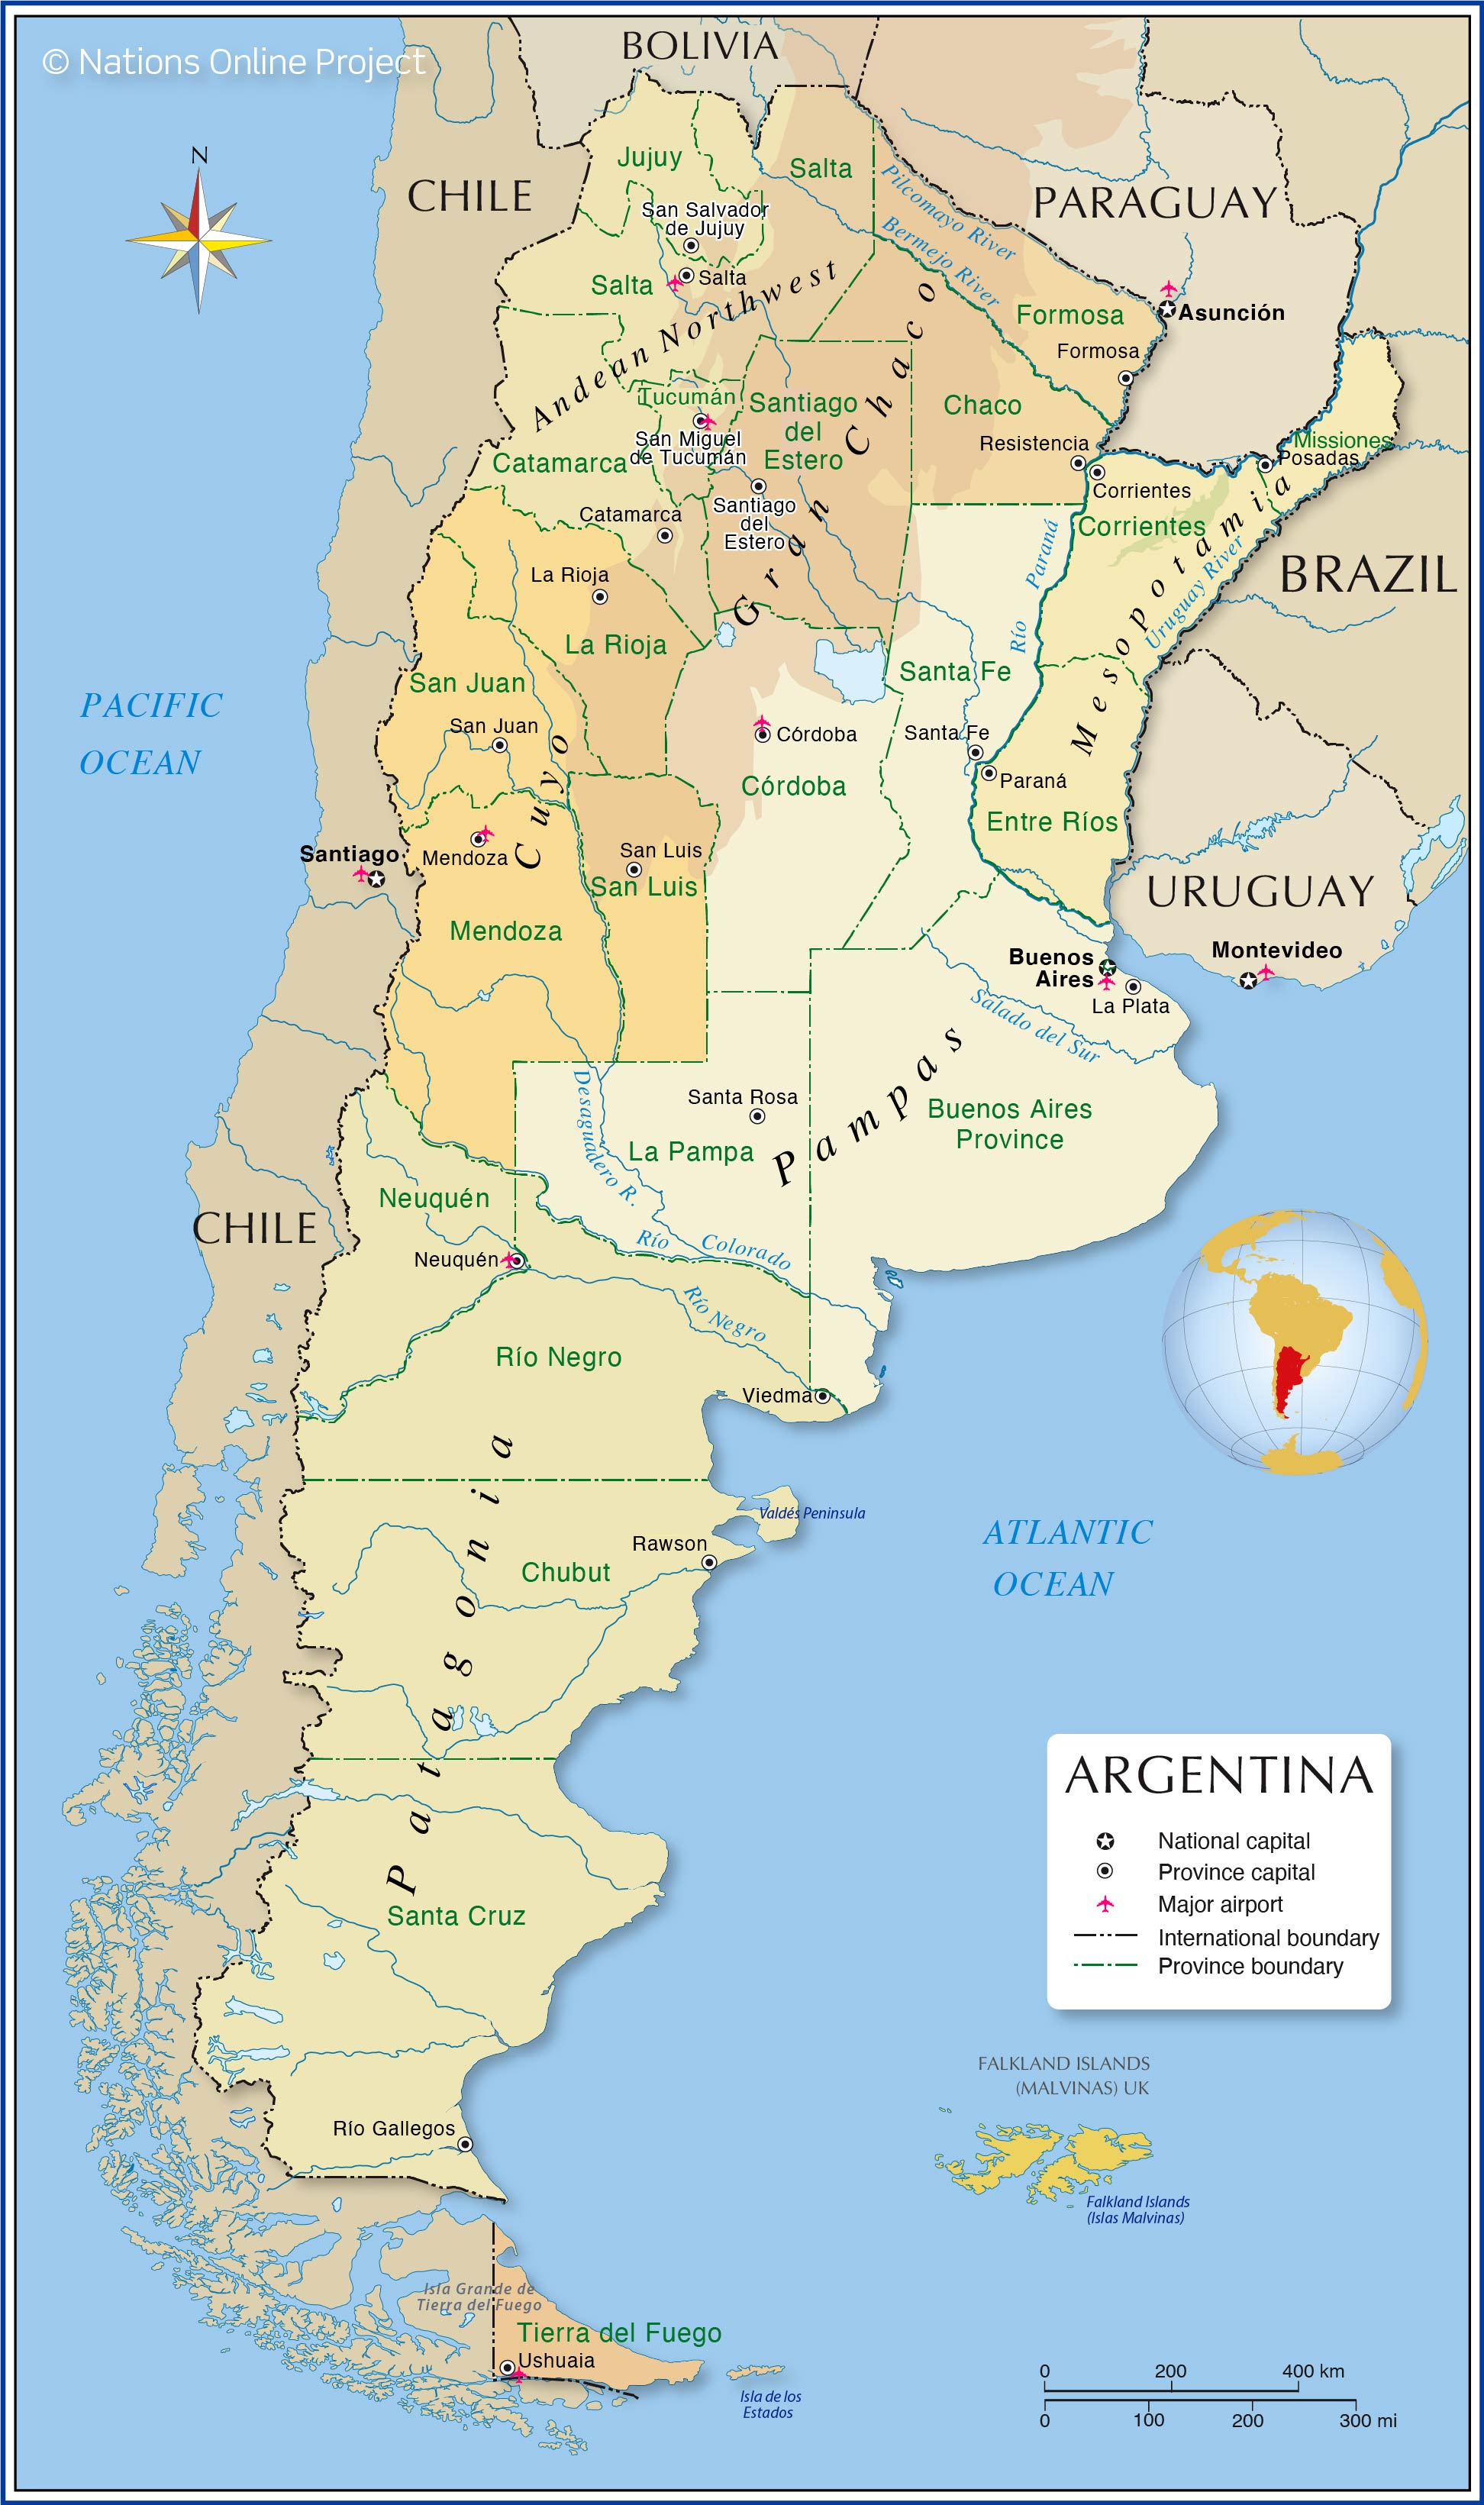 Map of Argentina showing the three main regions of the country, and the